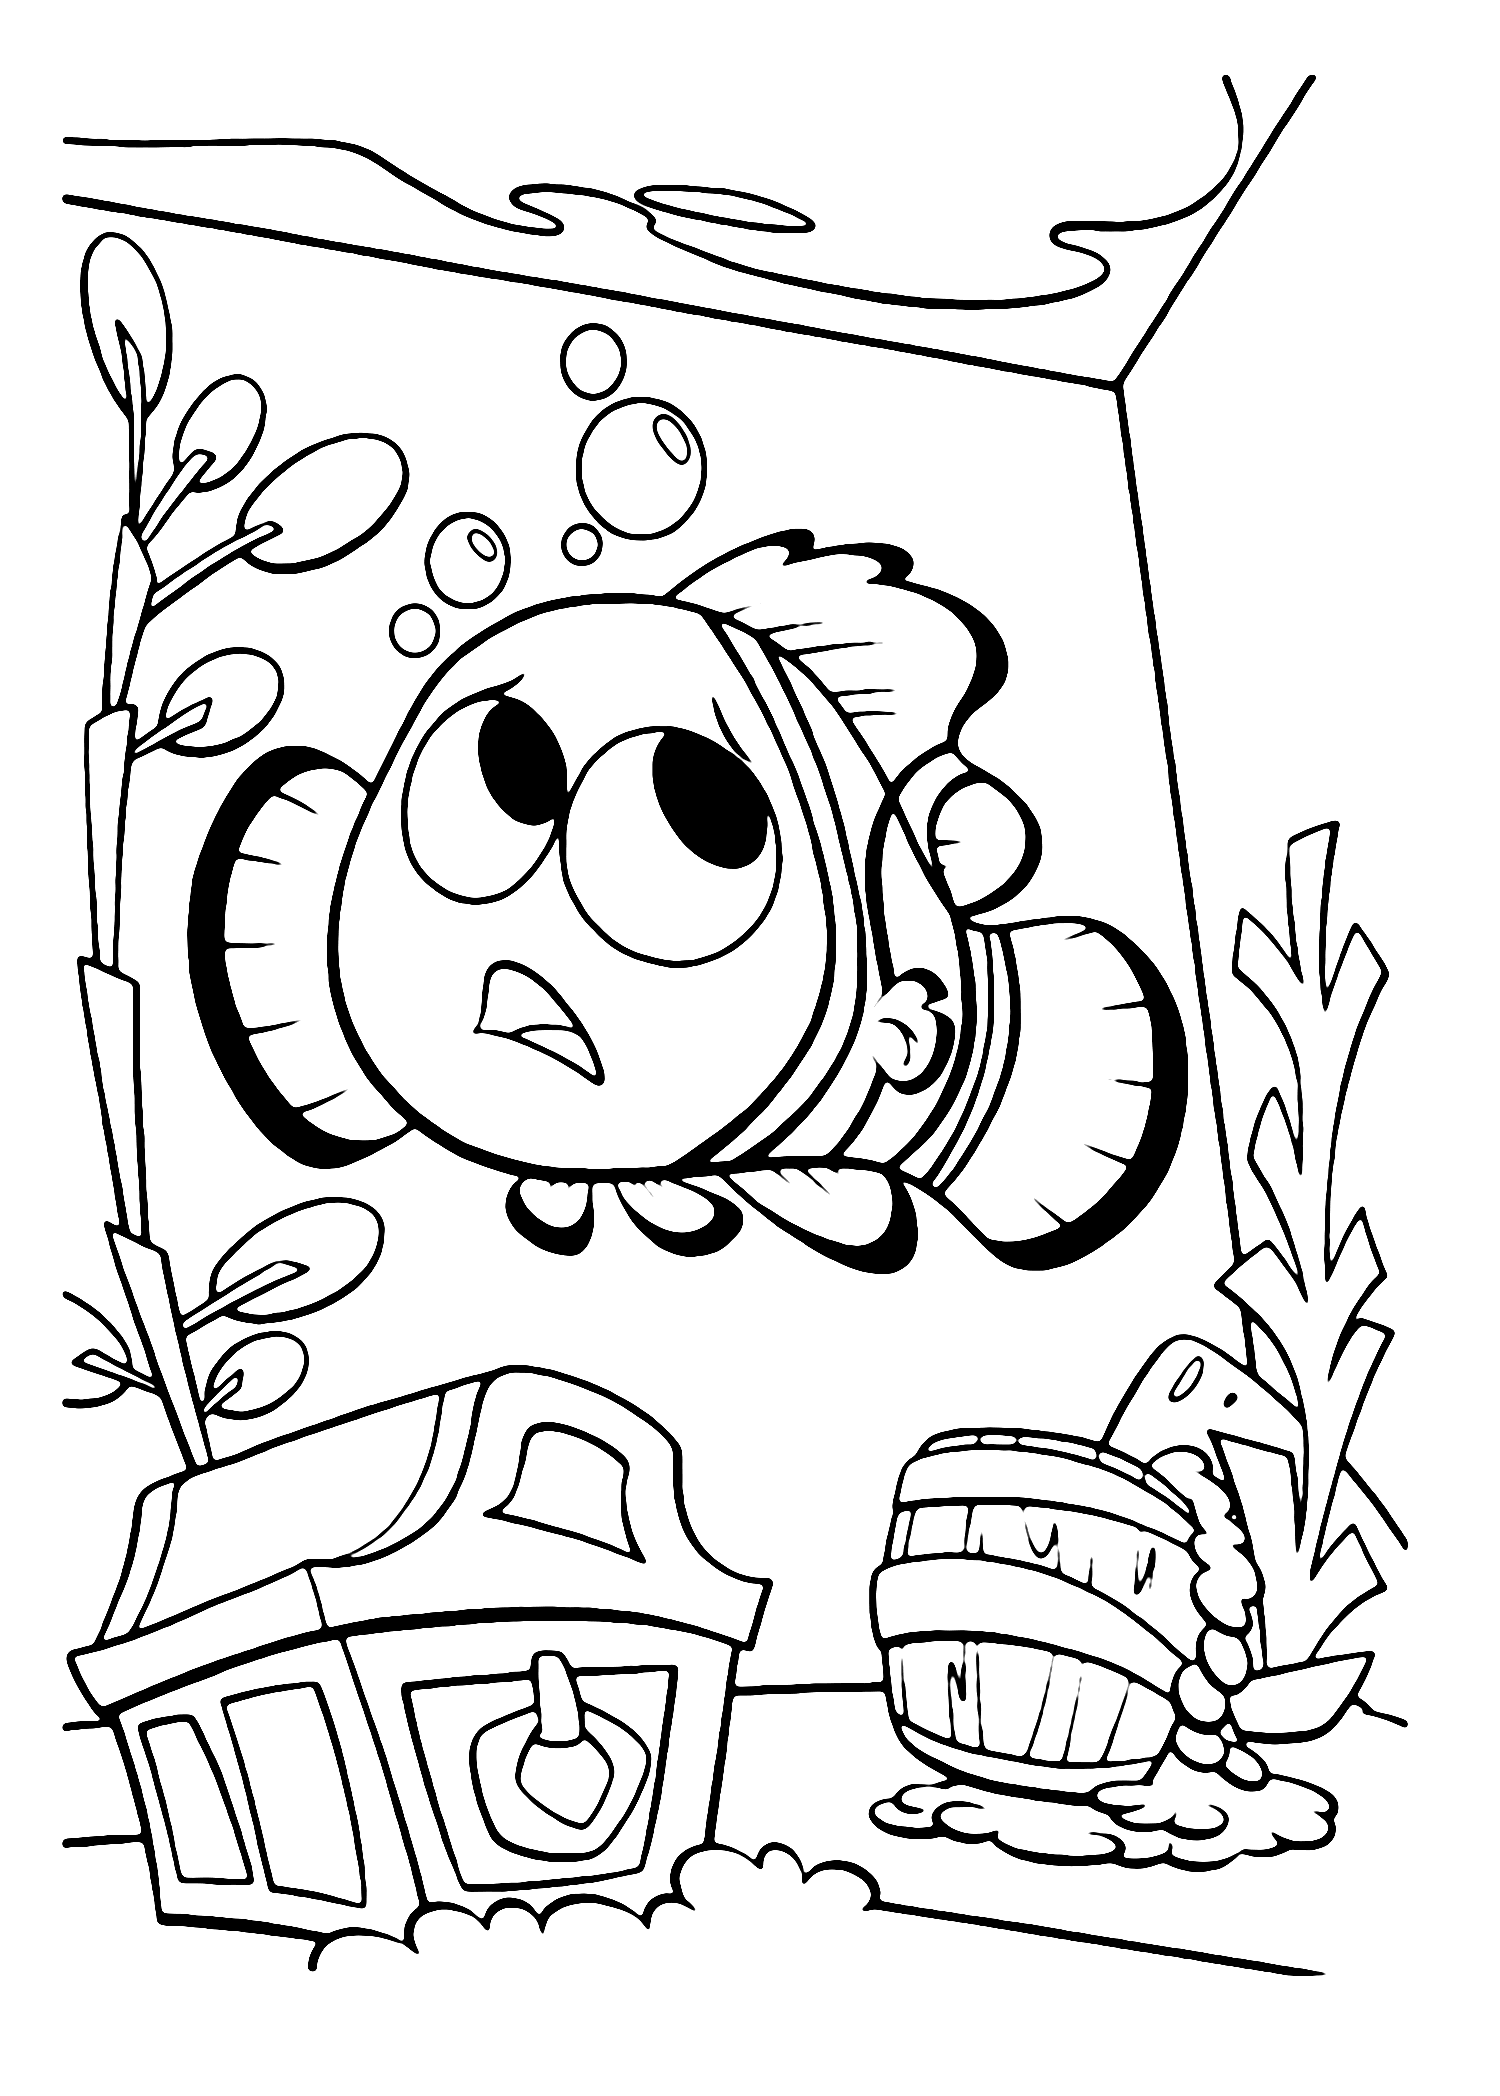 Coloring Page of Nemo Got Locked in the FIshtank